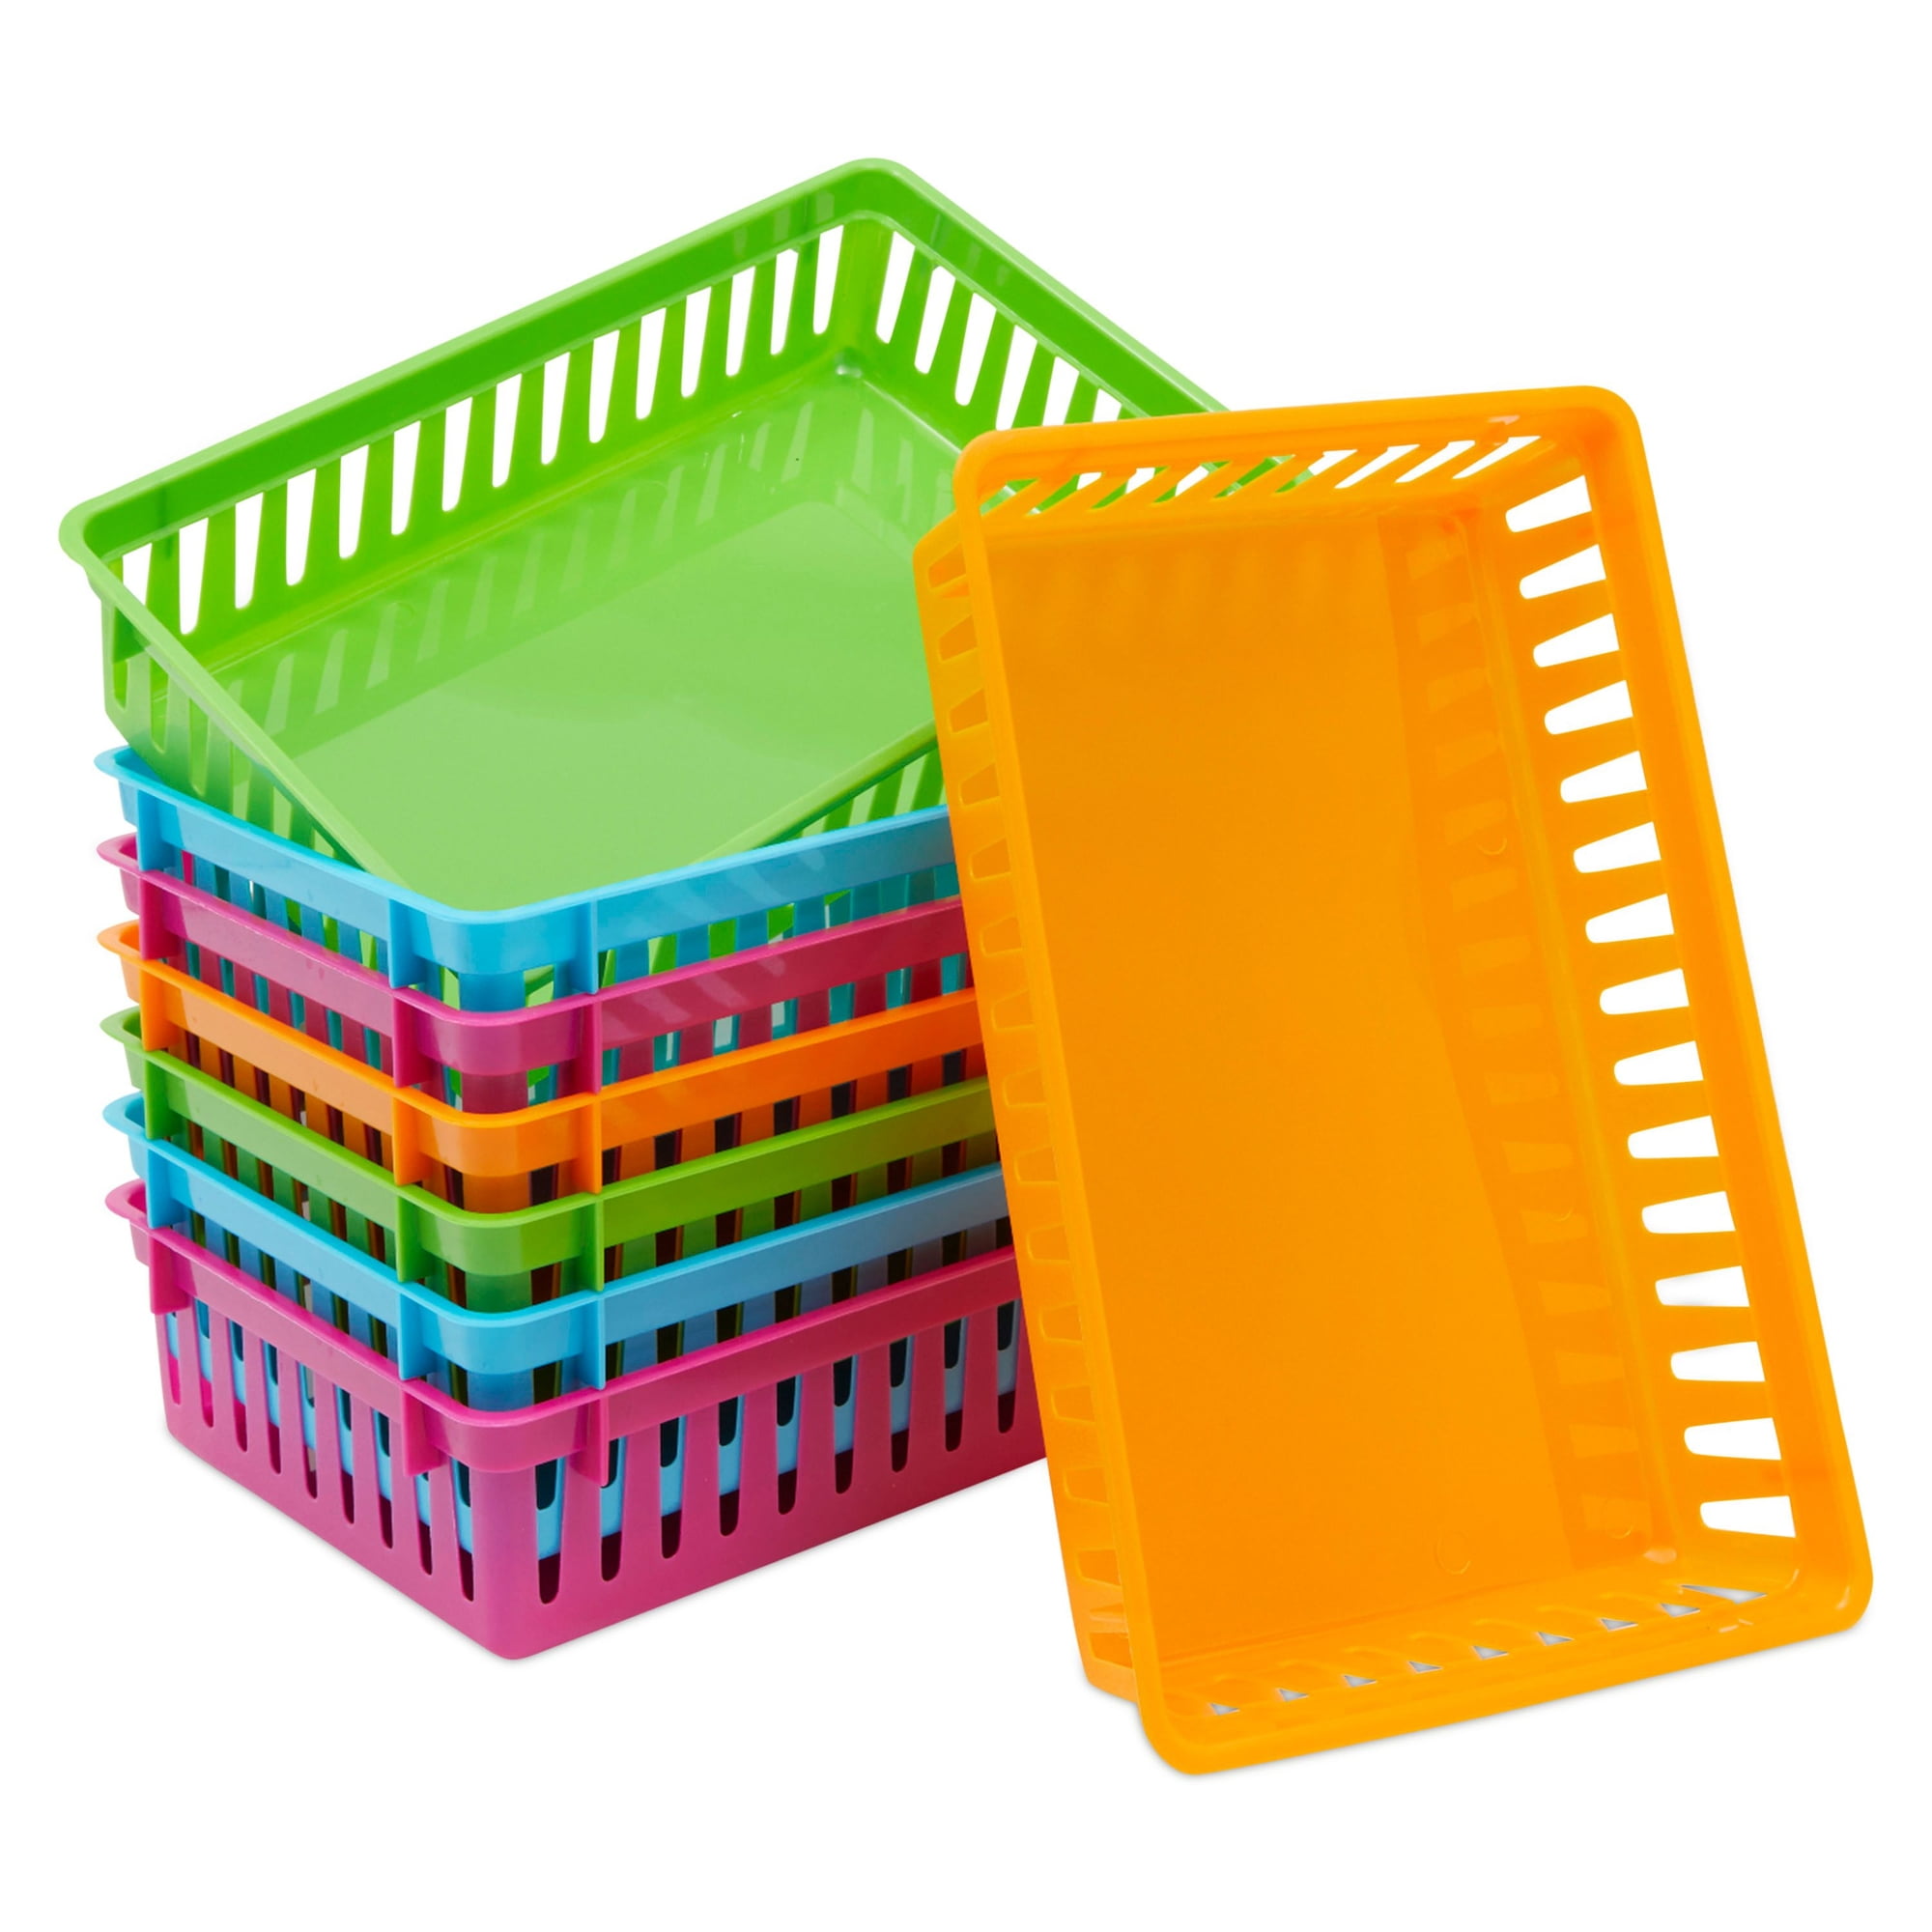 NDSWKR 12 Pack Small Plastic Storage Baskets, 8.5 x 5.5 x 3 Inch Colorful  Classroom Organizer Basket for Kitchen Office Shelves Bathroom Cabinet